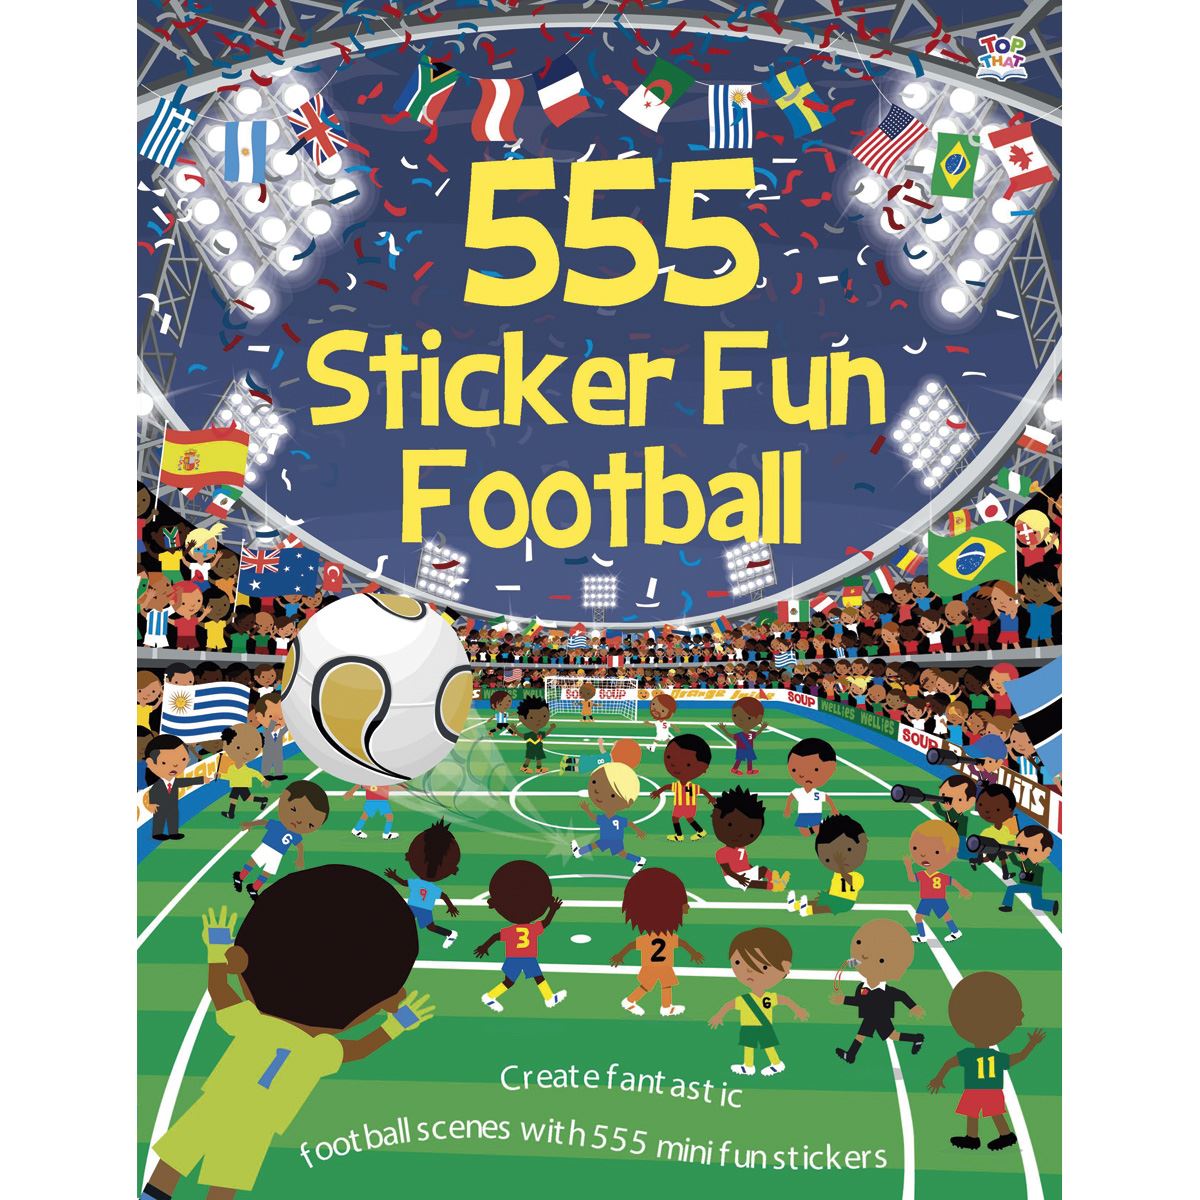 Sticker Fun Football Book Football Themed Toys and Games